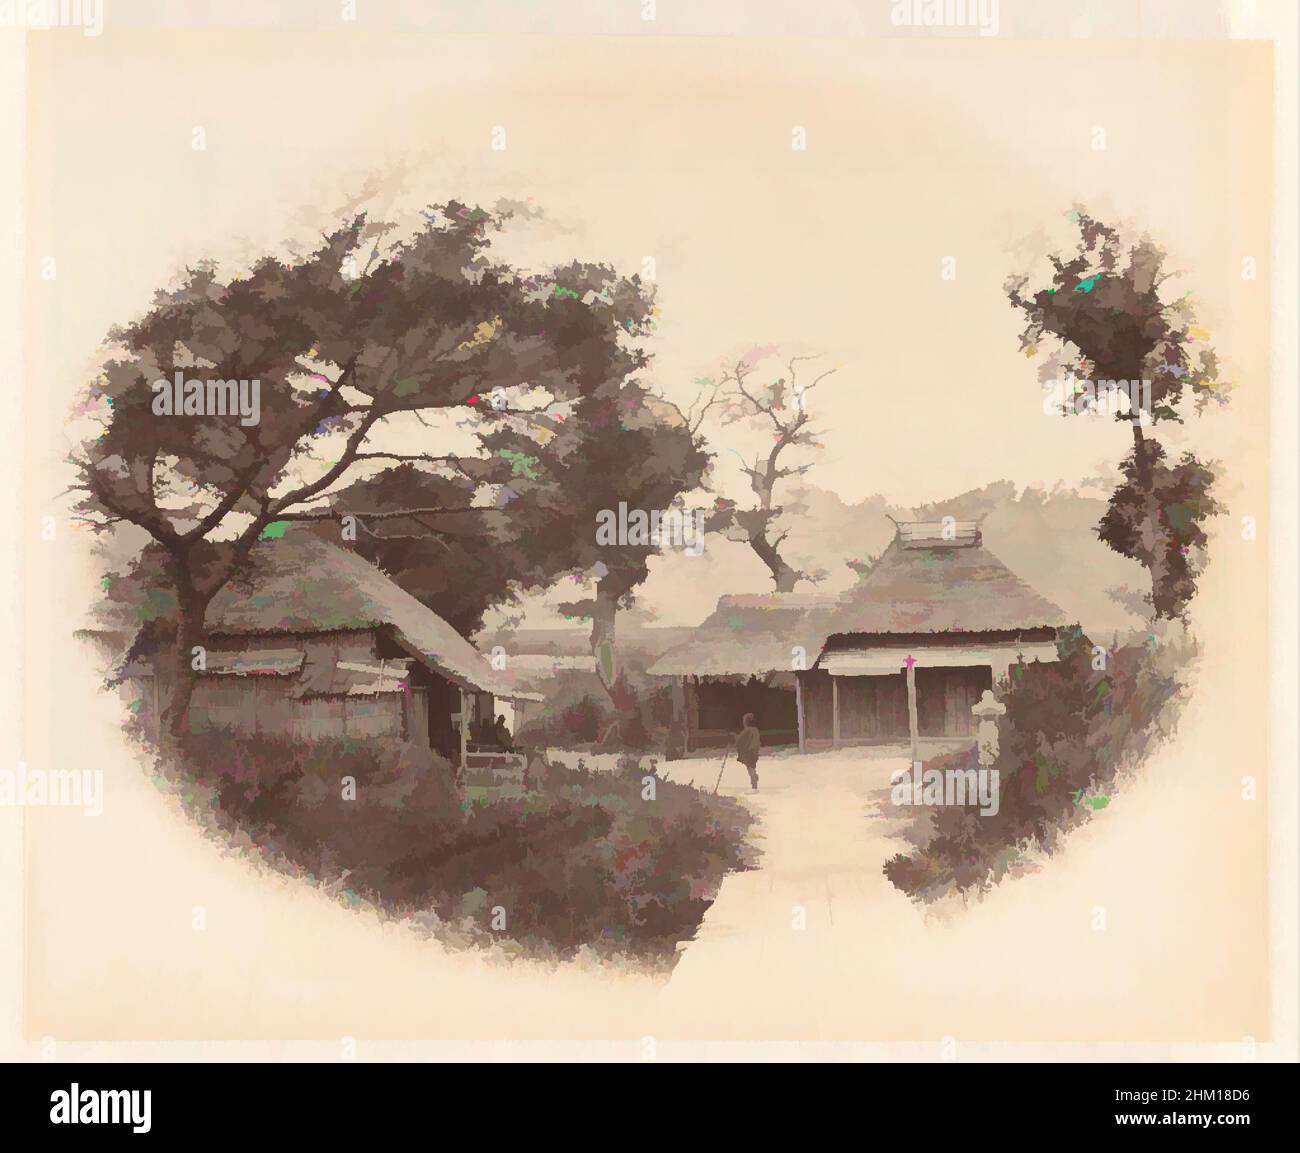 Art inspired by Village view near Kamakura, View near Kamakura where major Baldwin and lieut. Bird were murdered, Felice Beato, Kanagawa, 1864, paper, albumen print, height 232 mm × width 288 mm, Classic works modernized by Artotop with a splash of modernity. Shapes, color and value, eye-catching visual impact on art. Emotions through freedom of artworks in a contemporary way. A timeless message pursuing a wildly creative new direction. Artists turning to the digital medium and creating the Artotop NFT Stock Photo